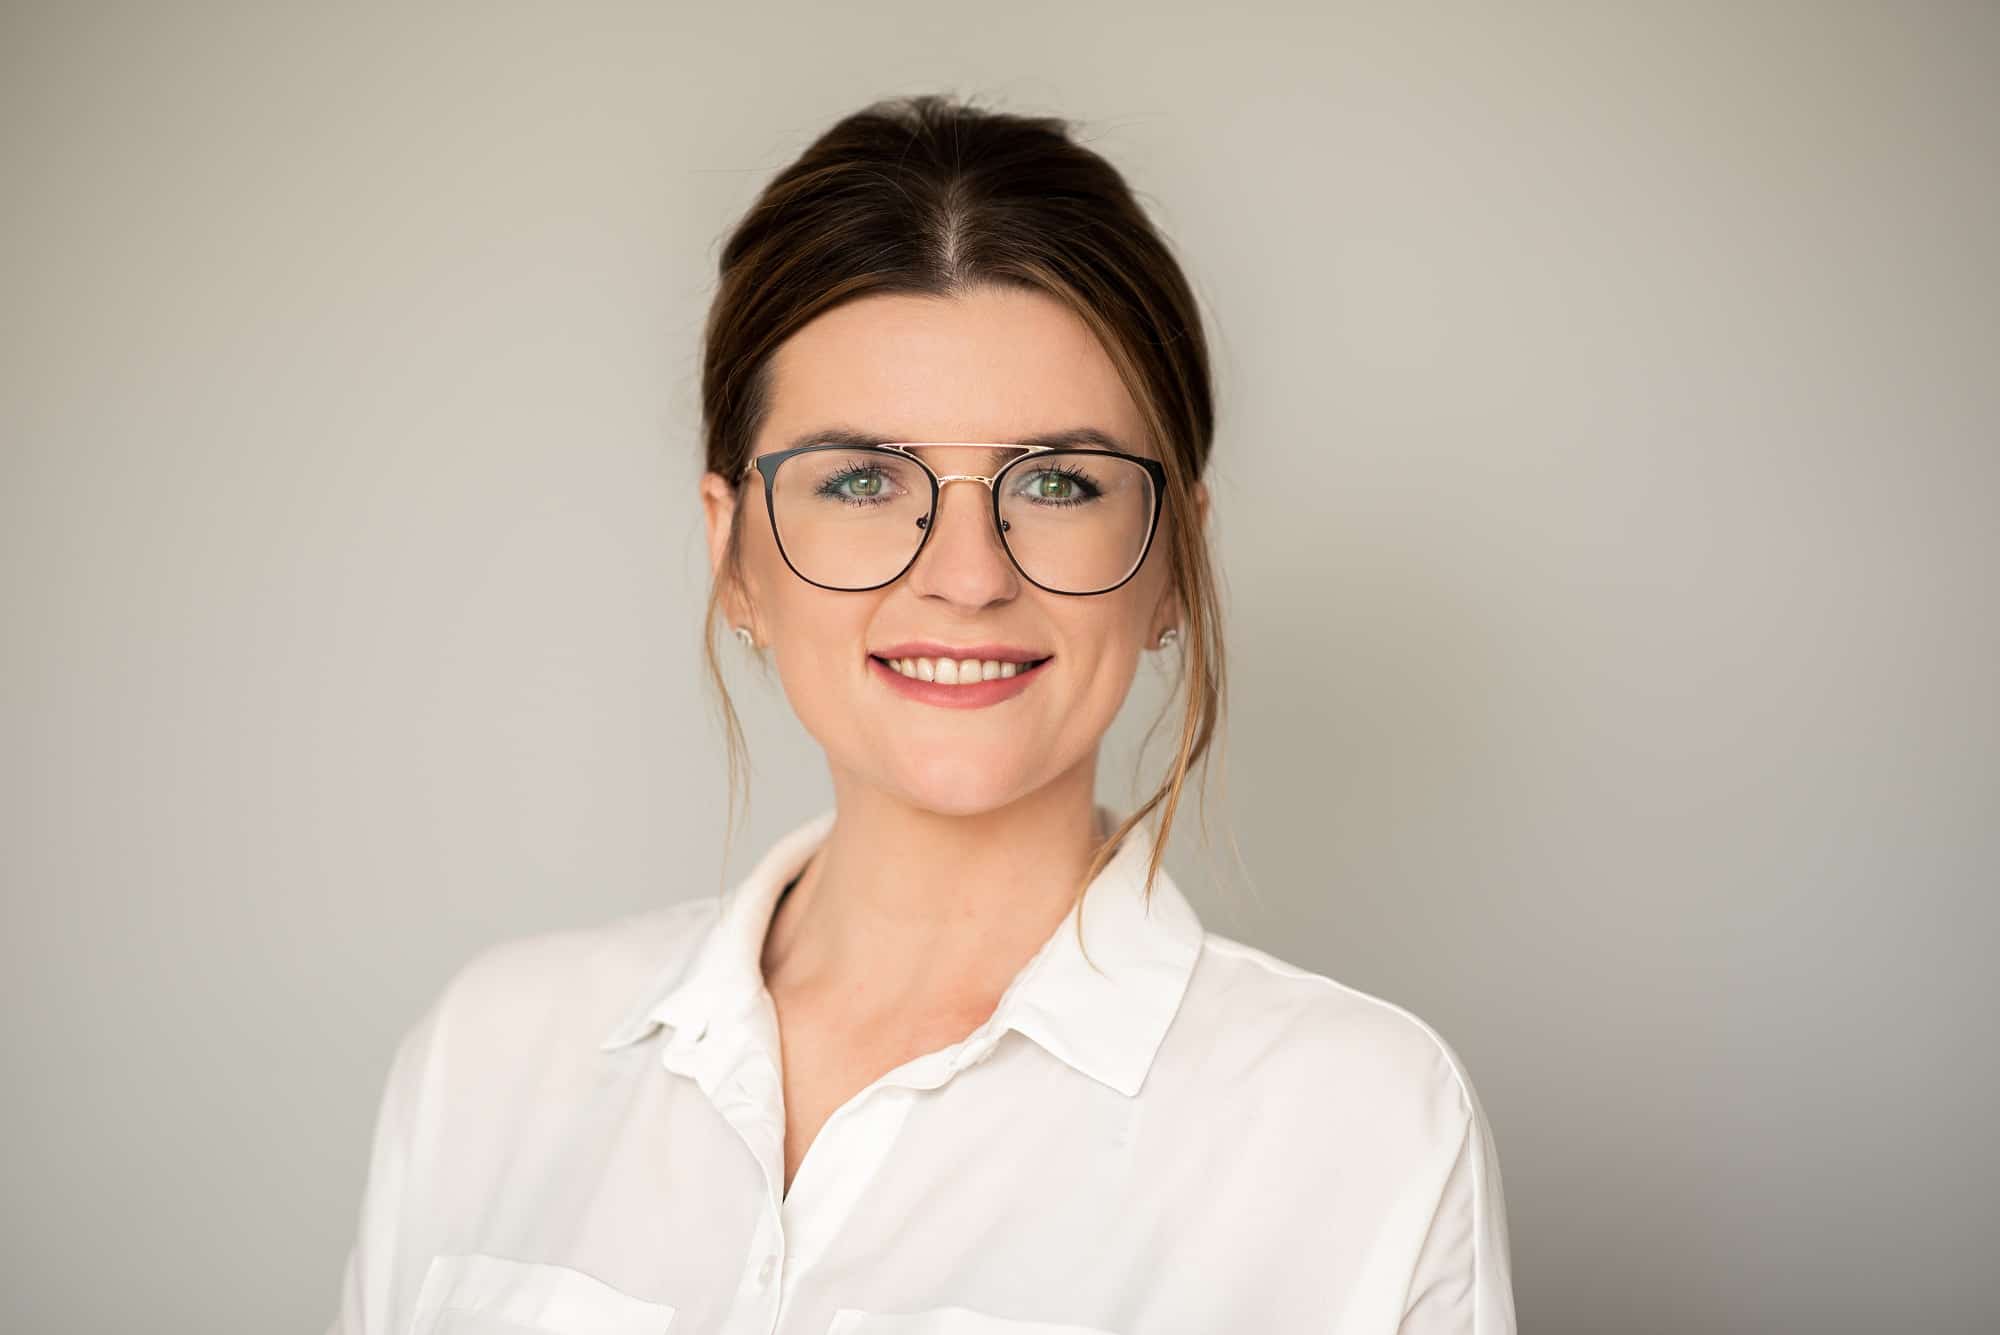 Staff portrait of a woman in glasses for the company she works for